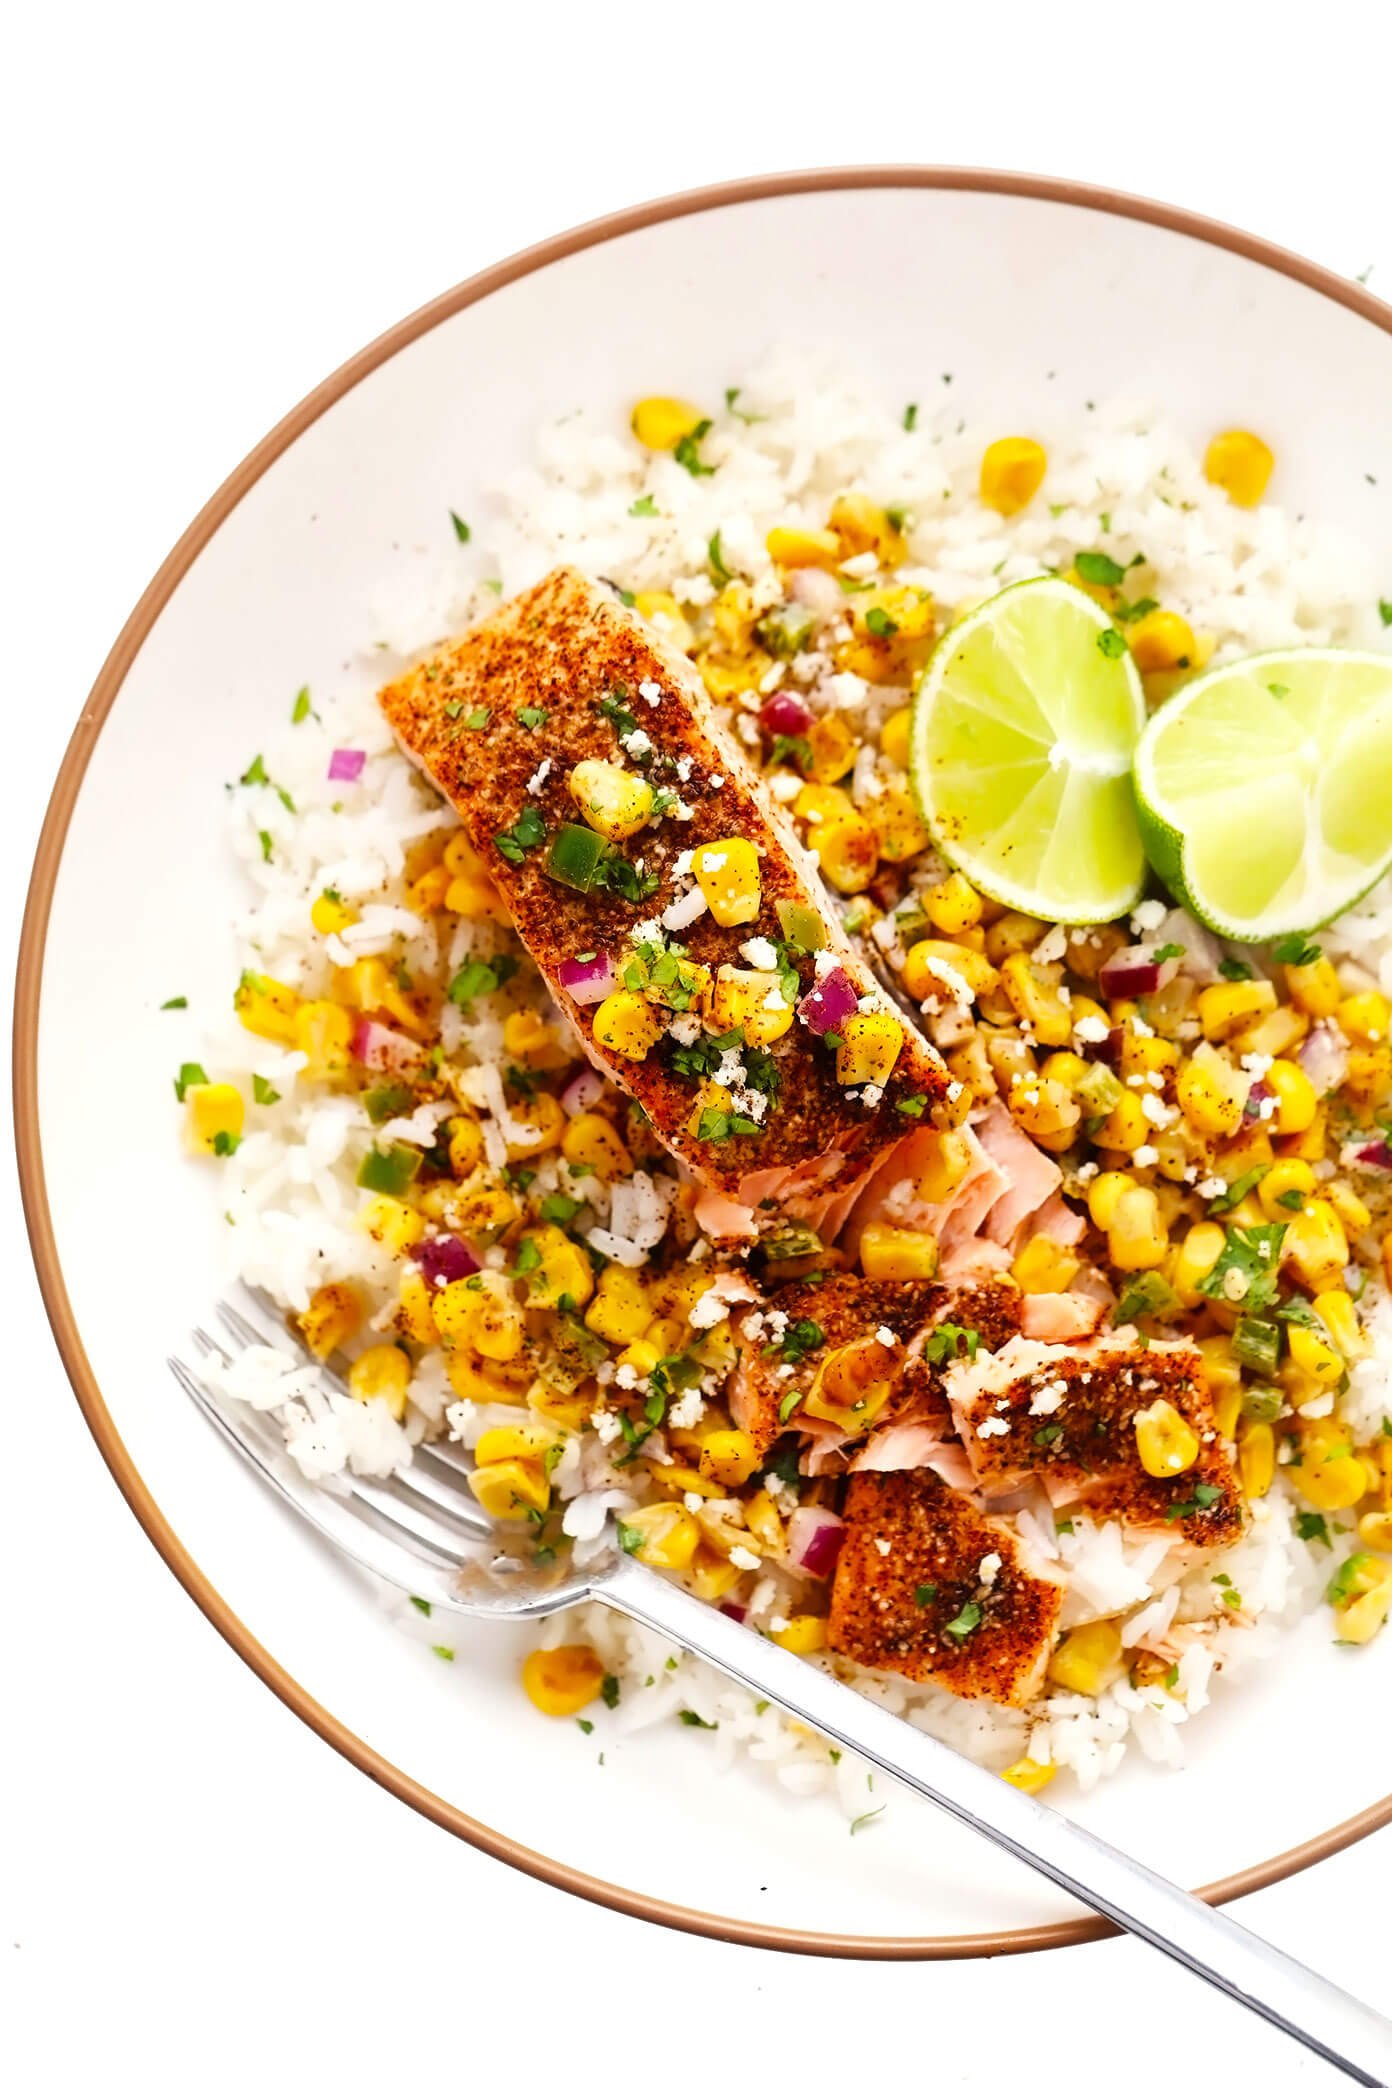 Chili Lime Salmon with Esquites